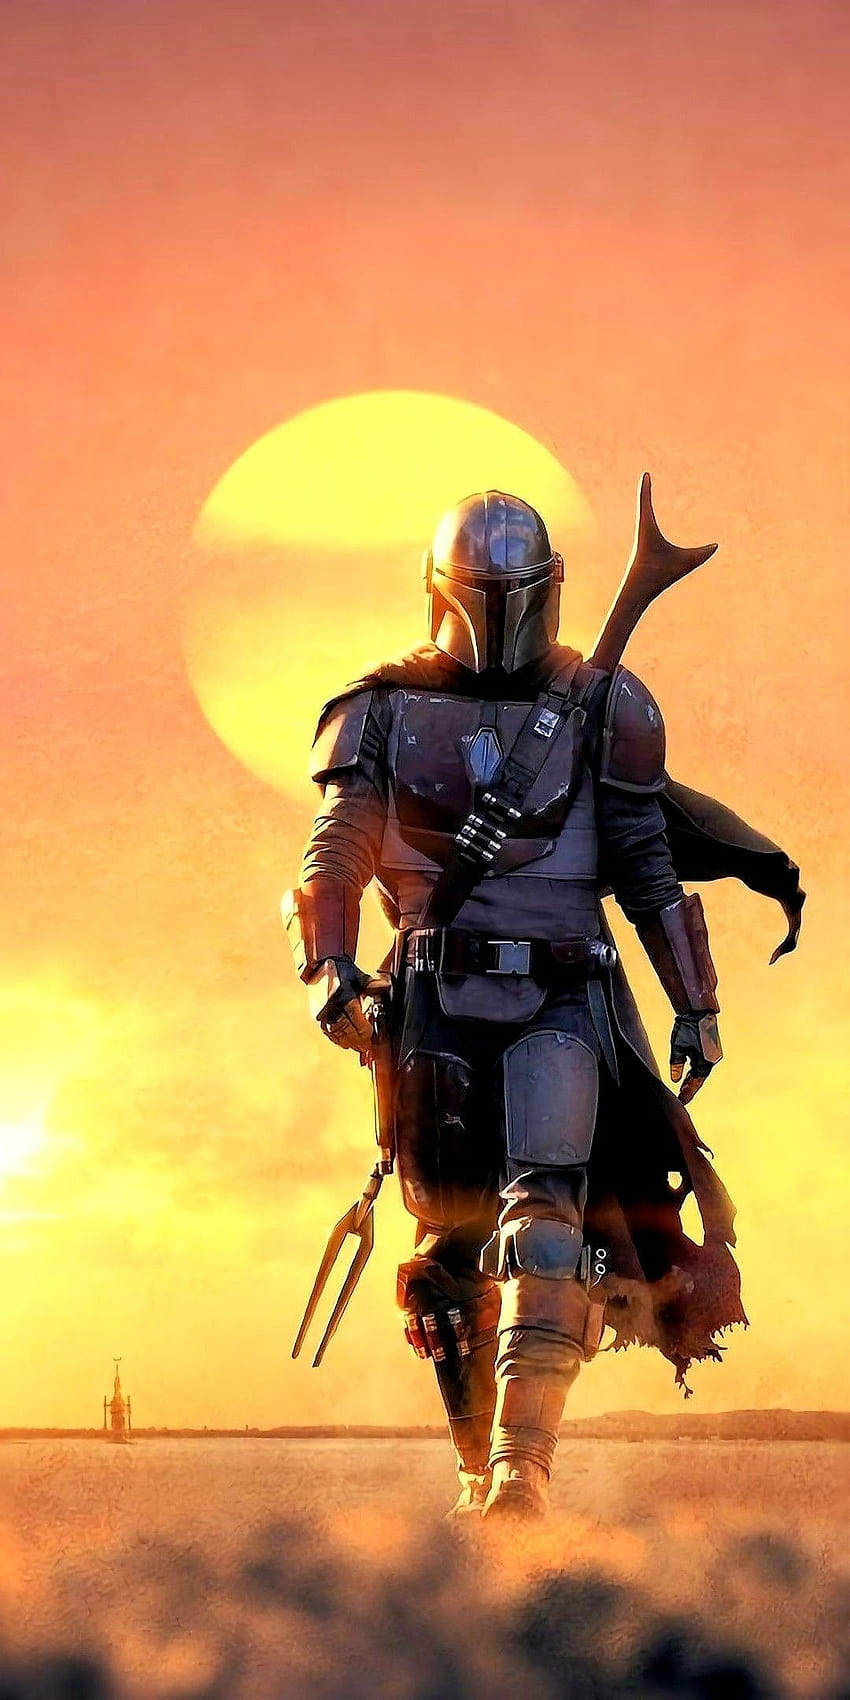 The mandalorian look amazing too bad in order to see it hou have to pay the disney monopoly in 2020, the mandalorian 2020 HD phone wallpaper